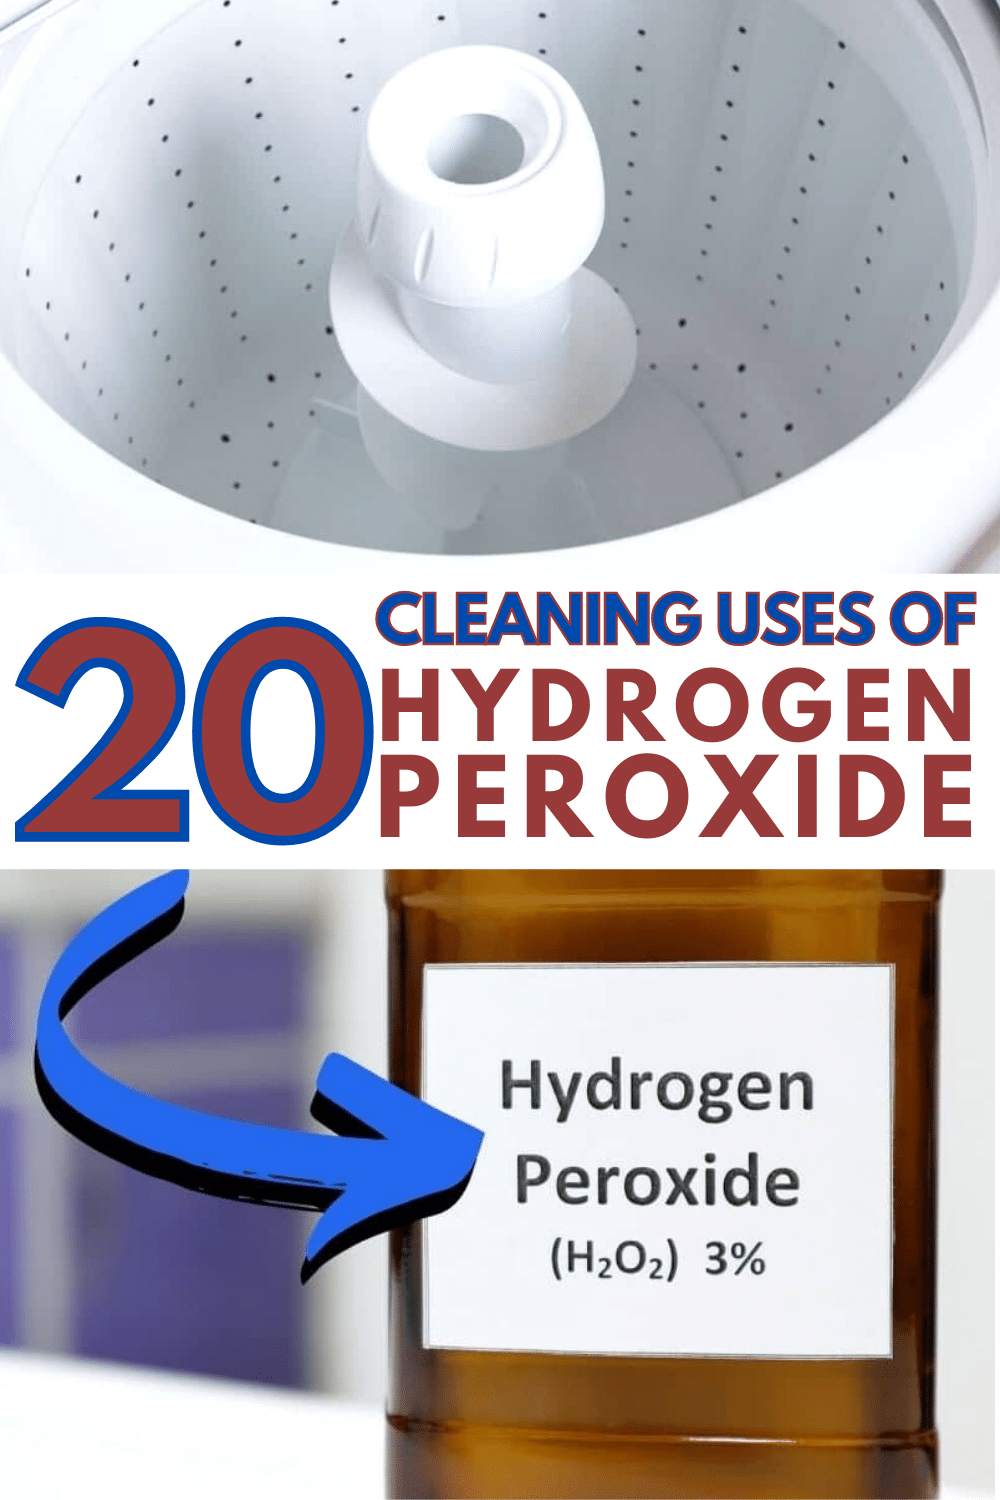 20 different ways to use hydrogen peroxide to clean and disinfect your home so you can save money on cleaning supplies. #hydrogenperoxide #naturalcleaners via @wondermomwannab